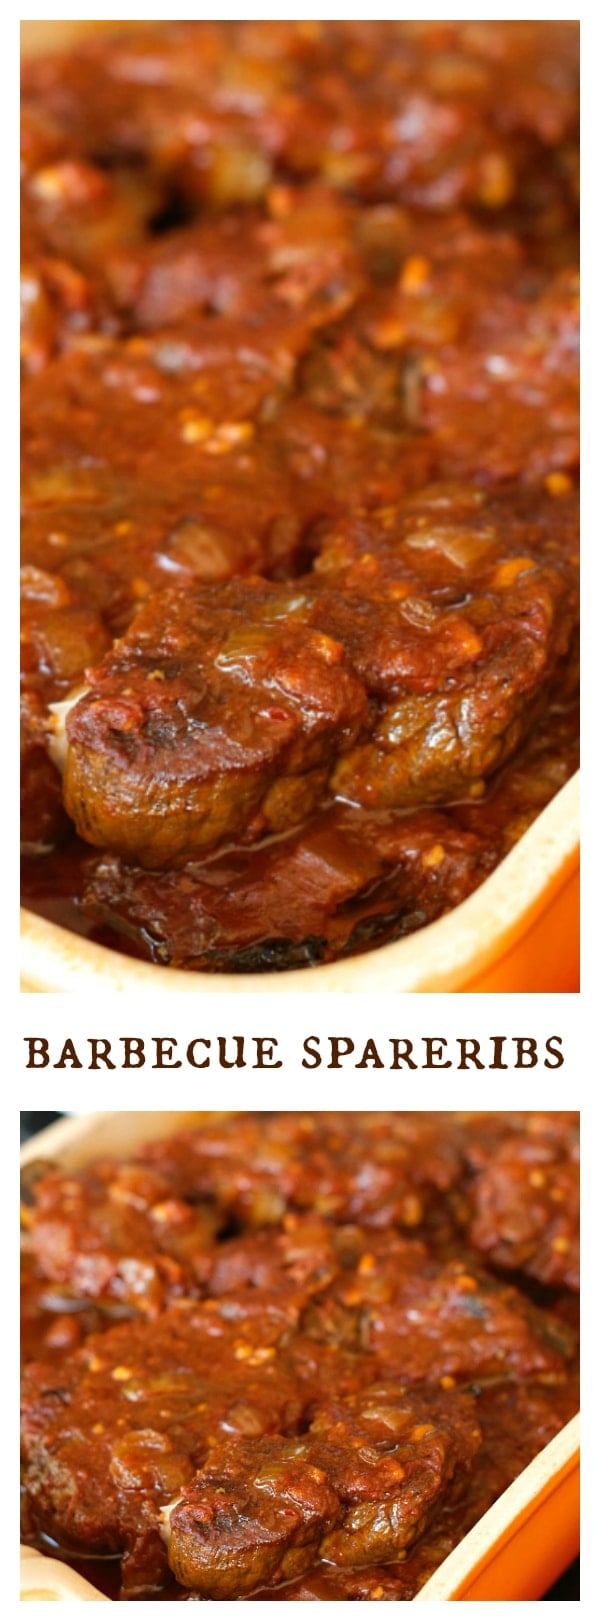 Barbecue Spareribs are slow cooked, and delightful tossed on the barbecue for camping or easy grilling!